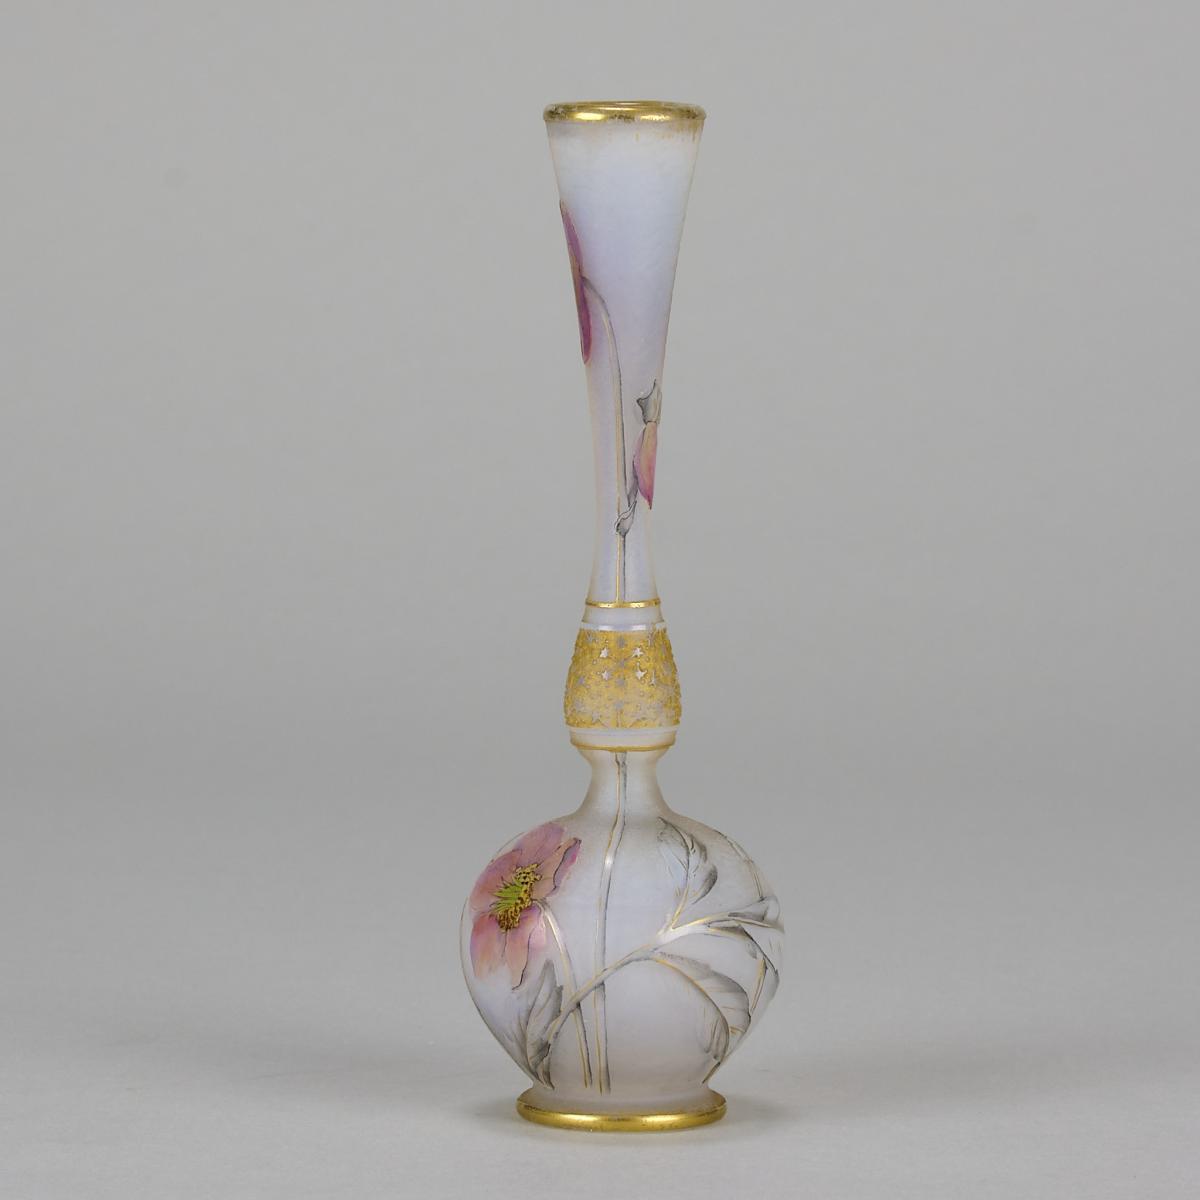 Early 20th Century Cameo Glass Vase entitled "Hellebore Vase" by Daum Frères